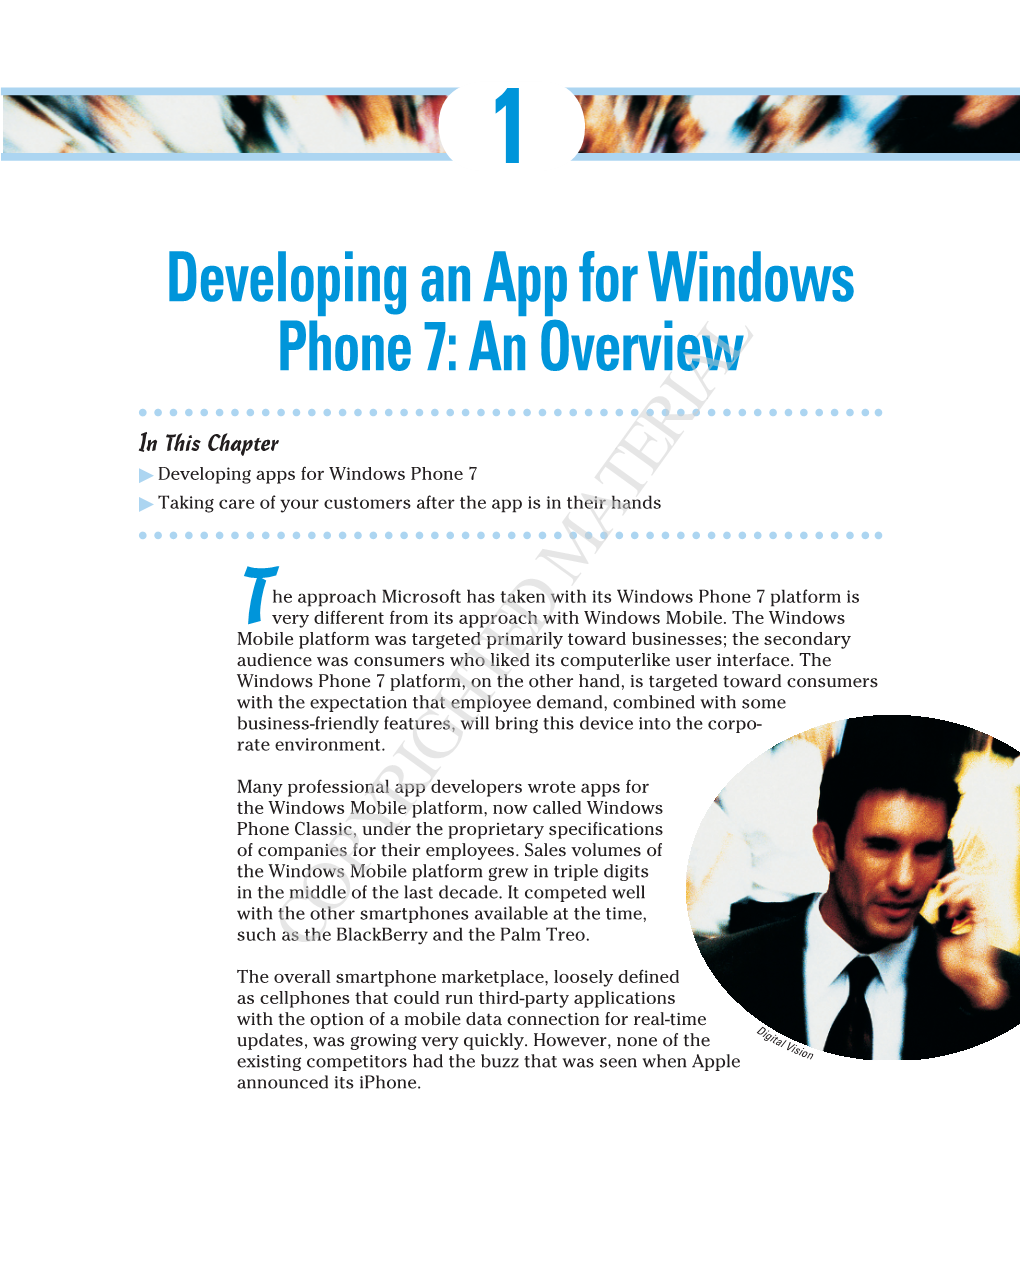 Developing an App for Windows Phone 7: an Overview